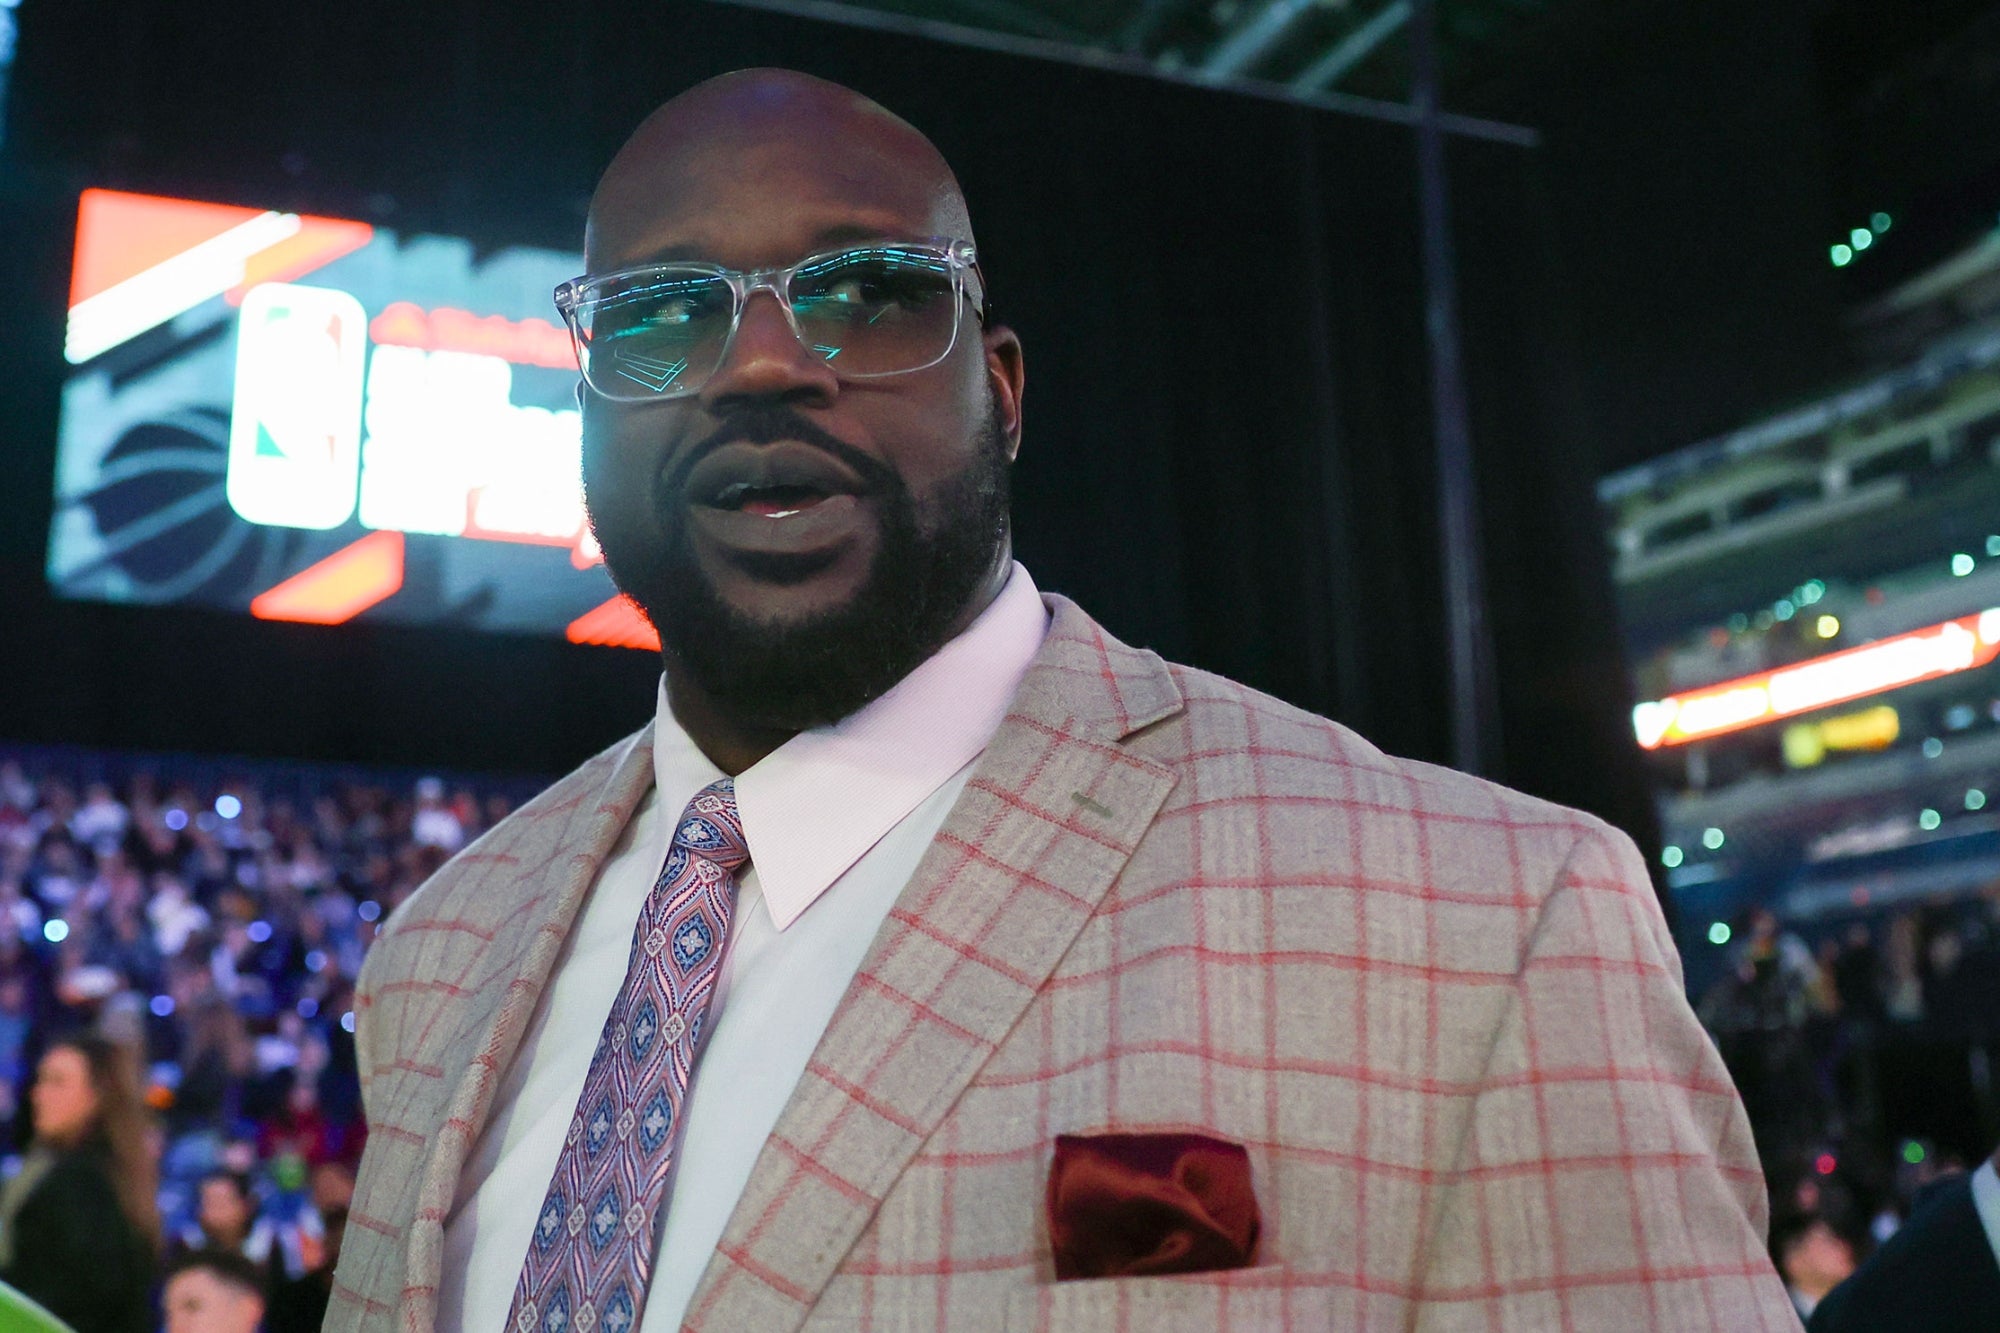 Clinton Sparks Podcast: Shaquille O’Neal’s Journey from NBA Superstar to Entrepreneur [Video]